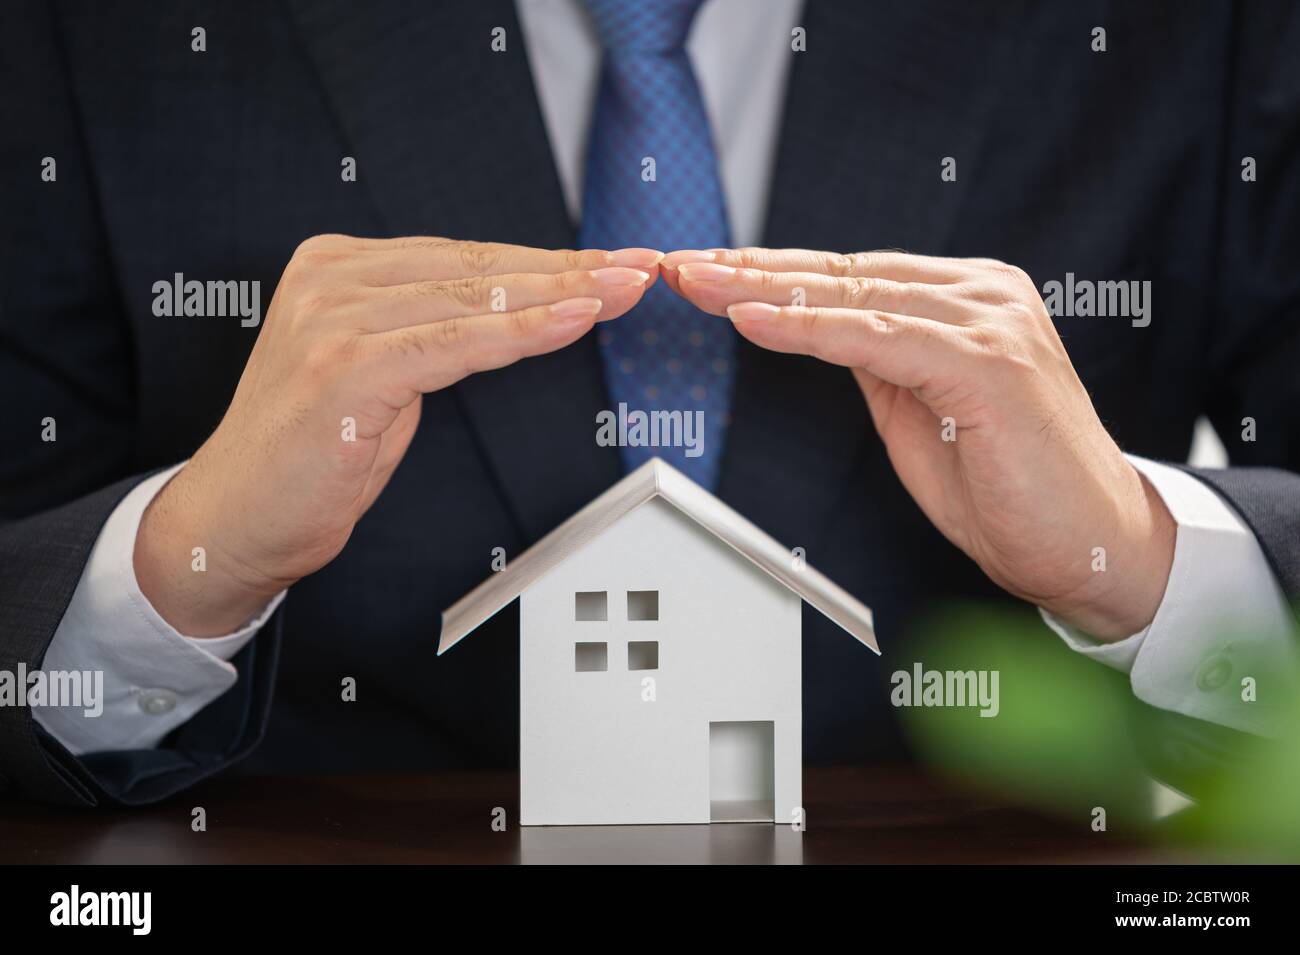 Businessman with house model on the desk. Real estate concept. Stock Photo